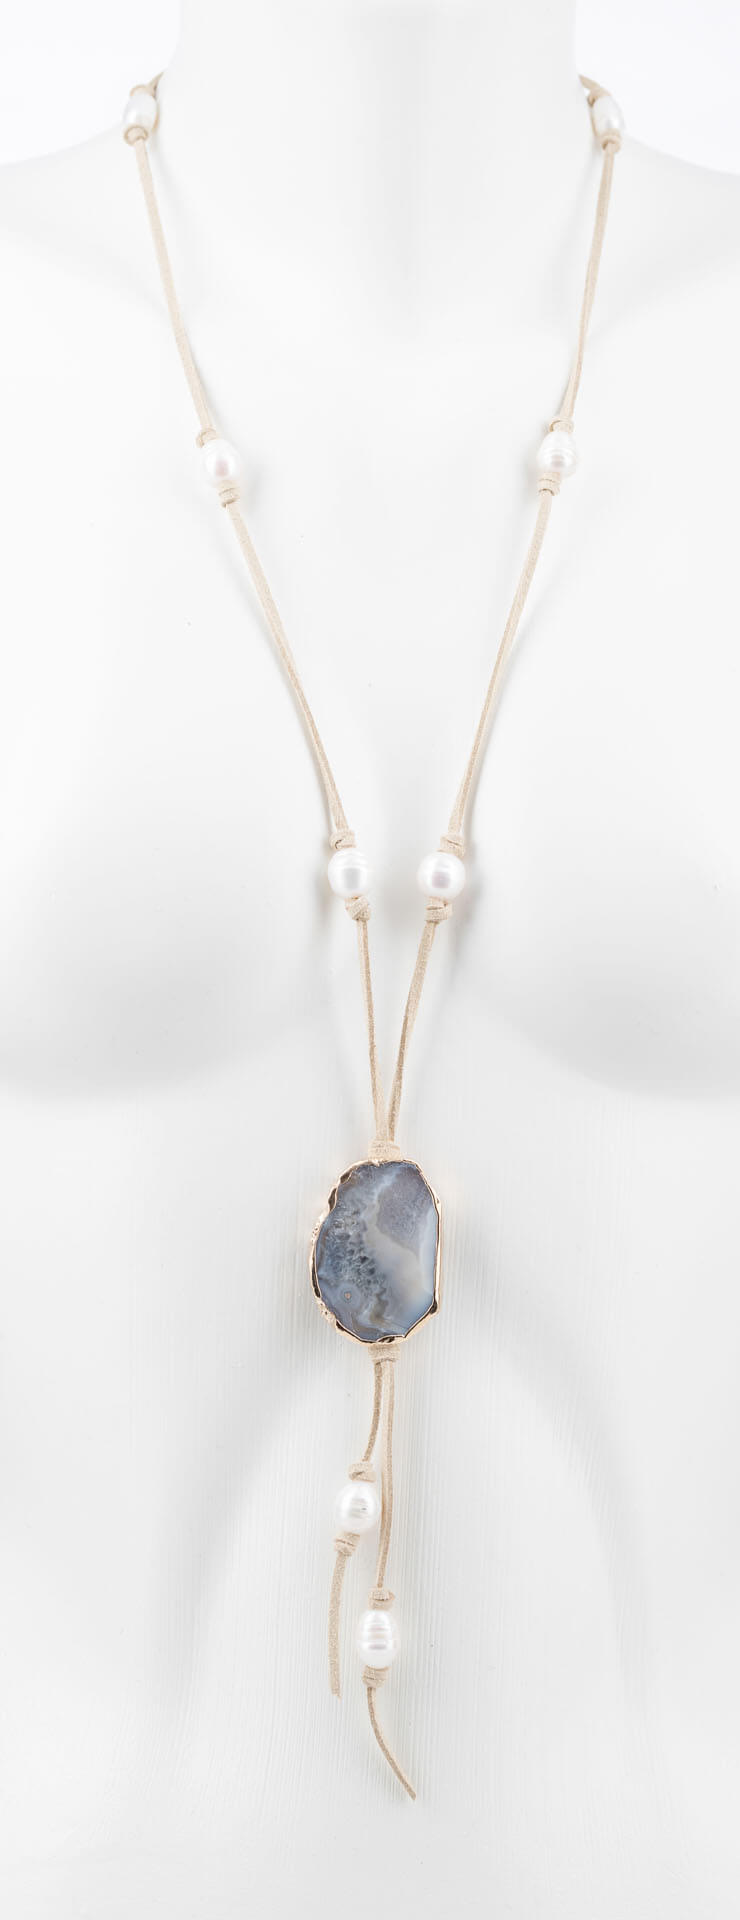 "Freshwater Pearls" long necklace with white freshwater pearls and agate pendant - beige